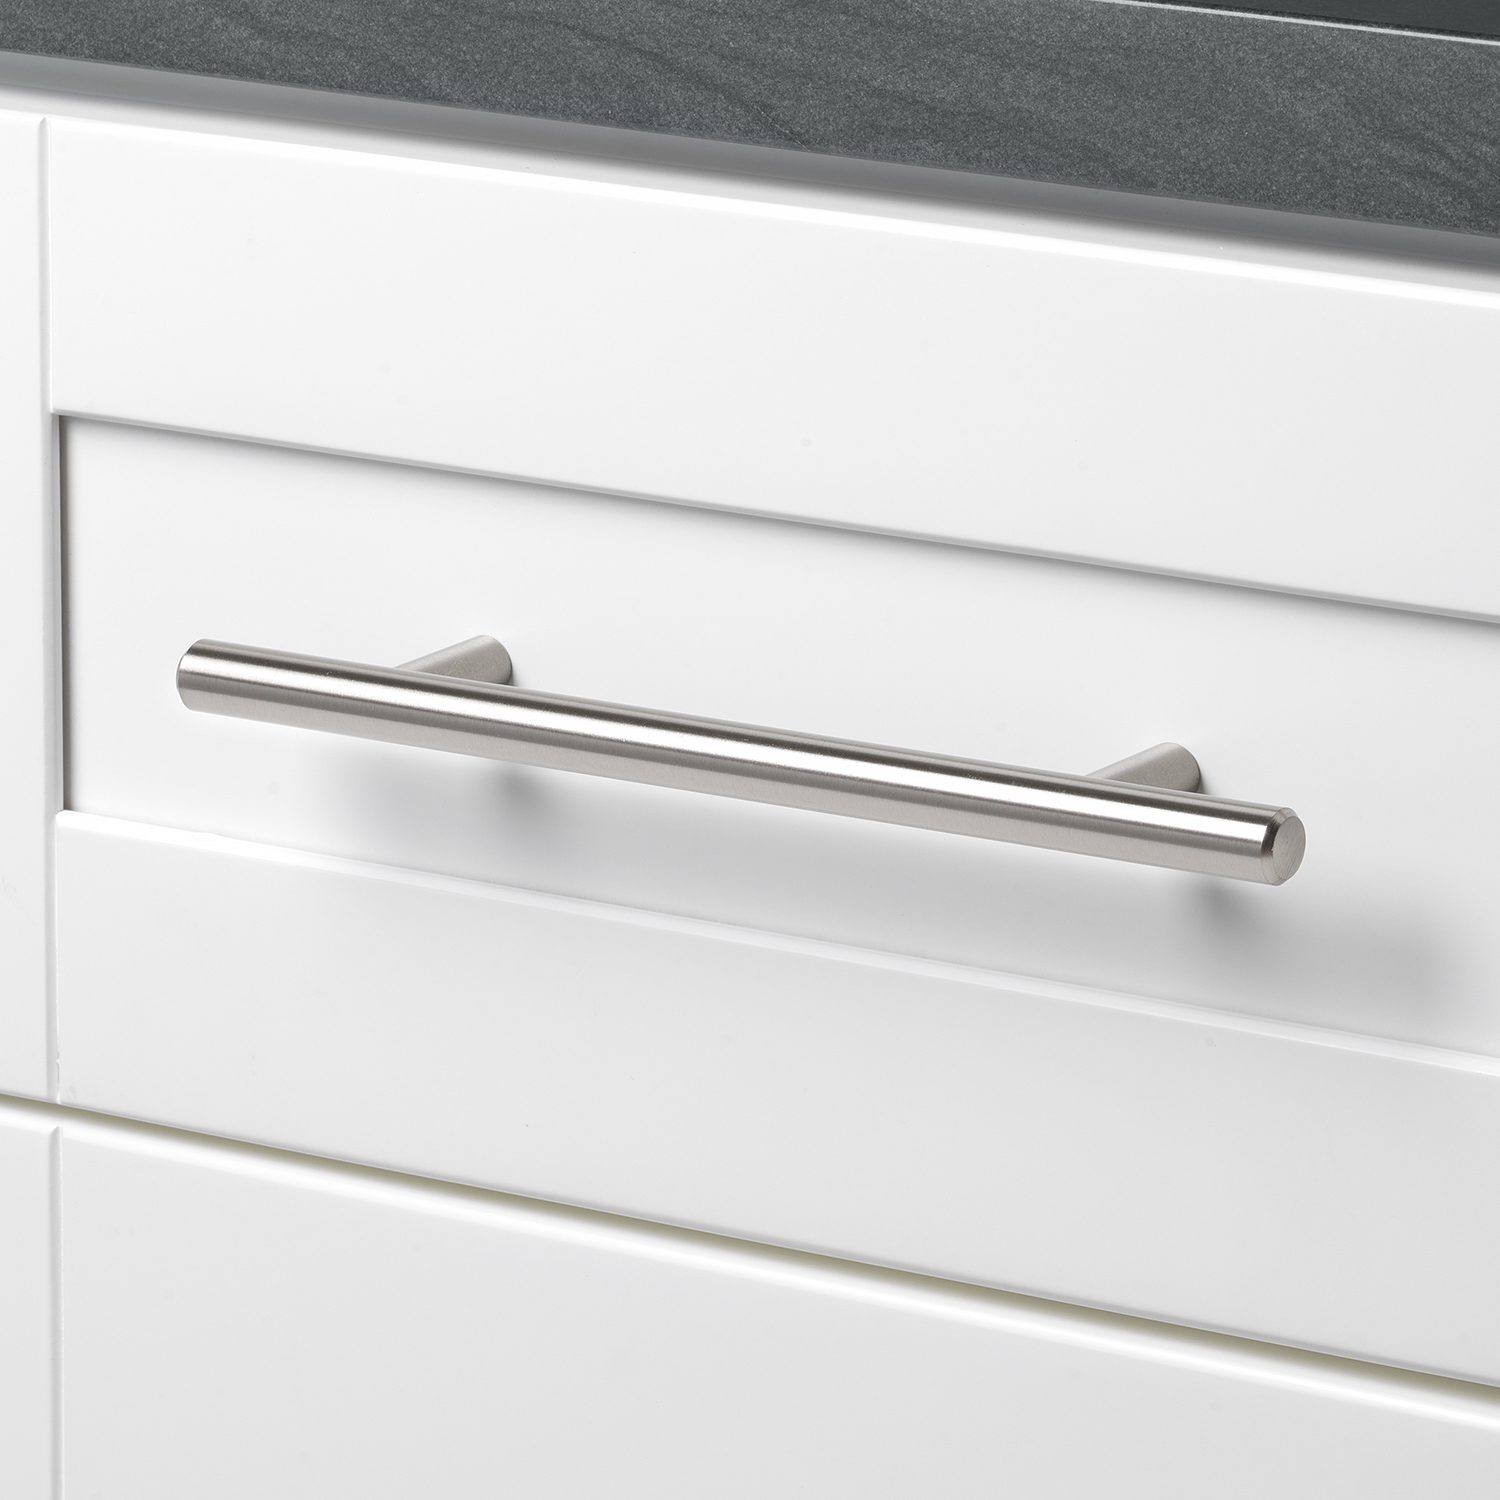 SOLID STAINLESS STEEL, kitchen handles